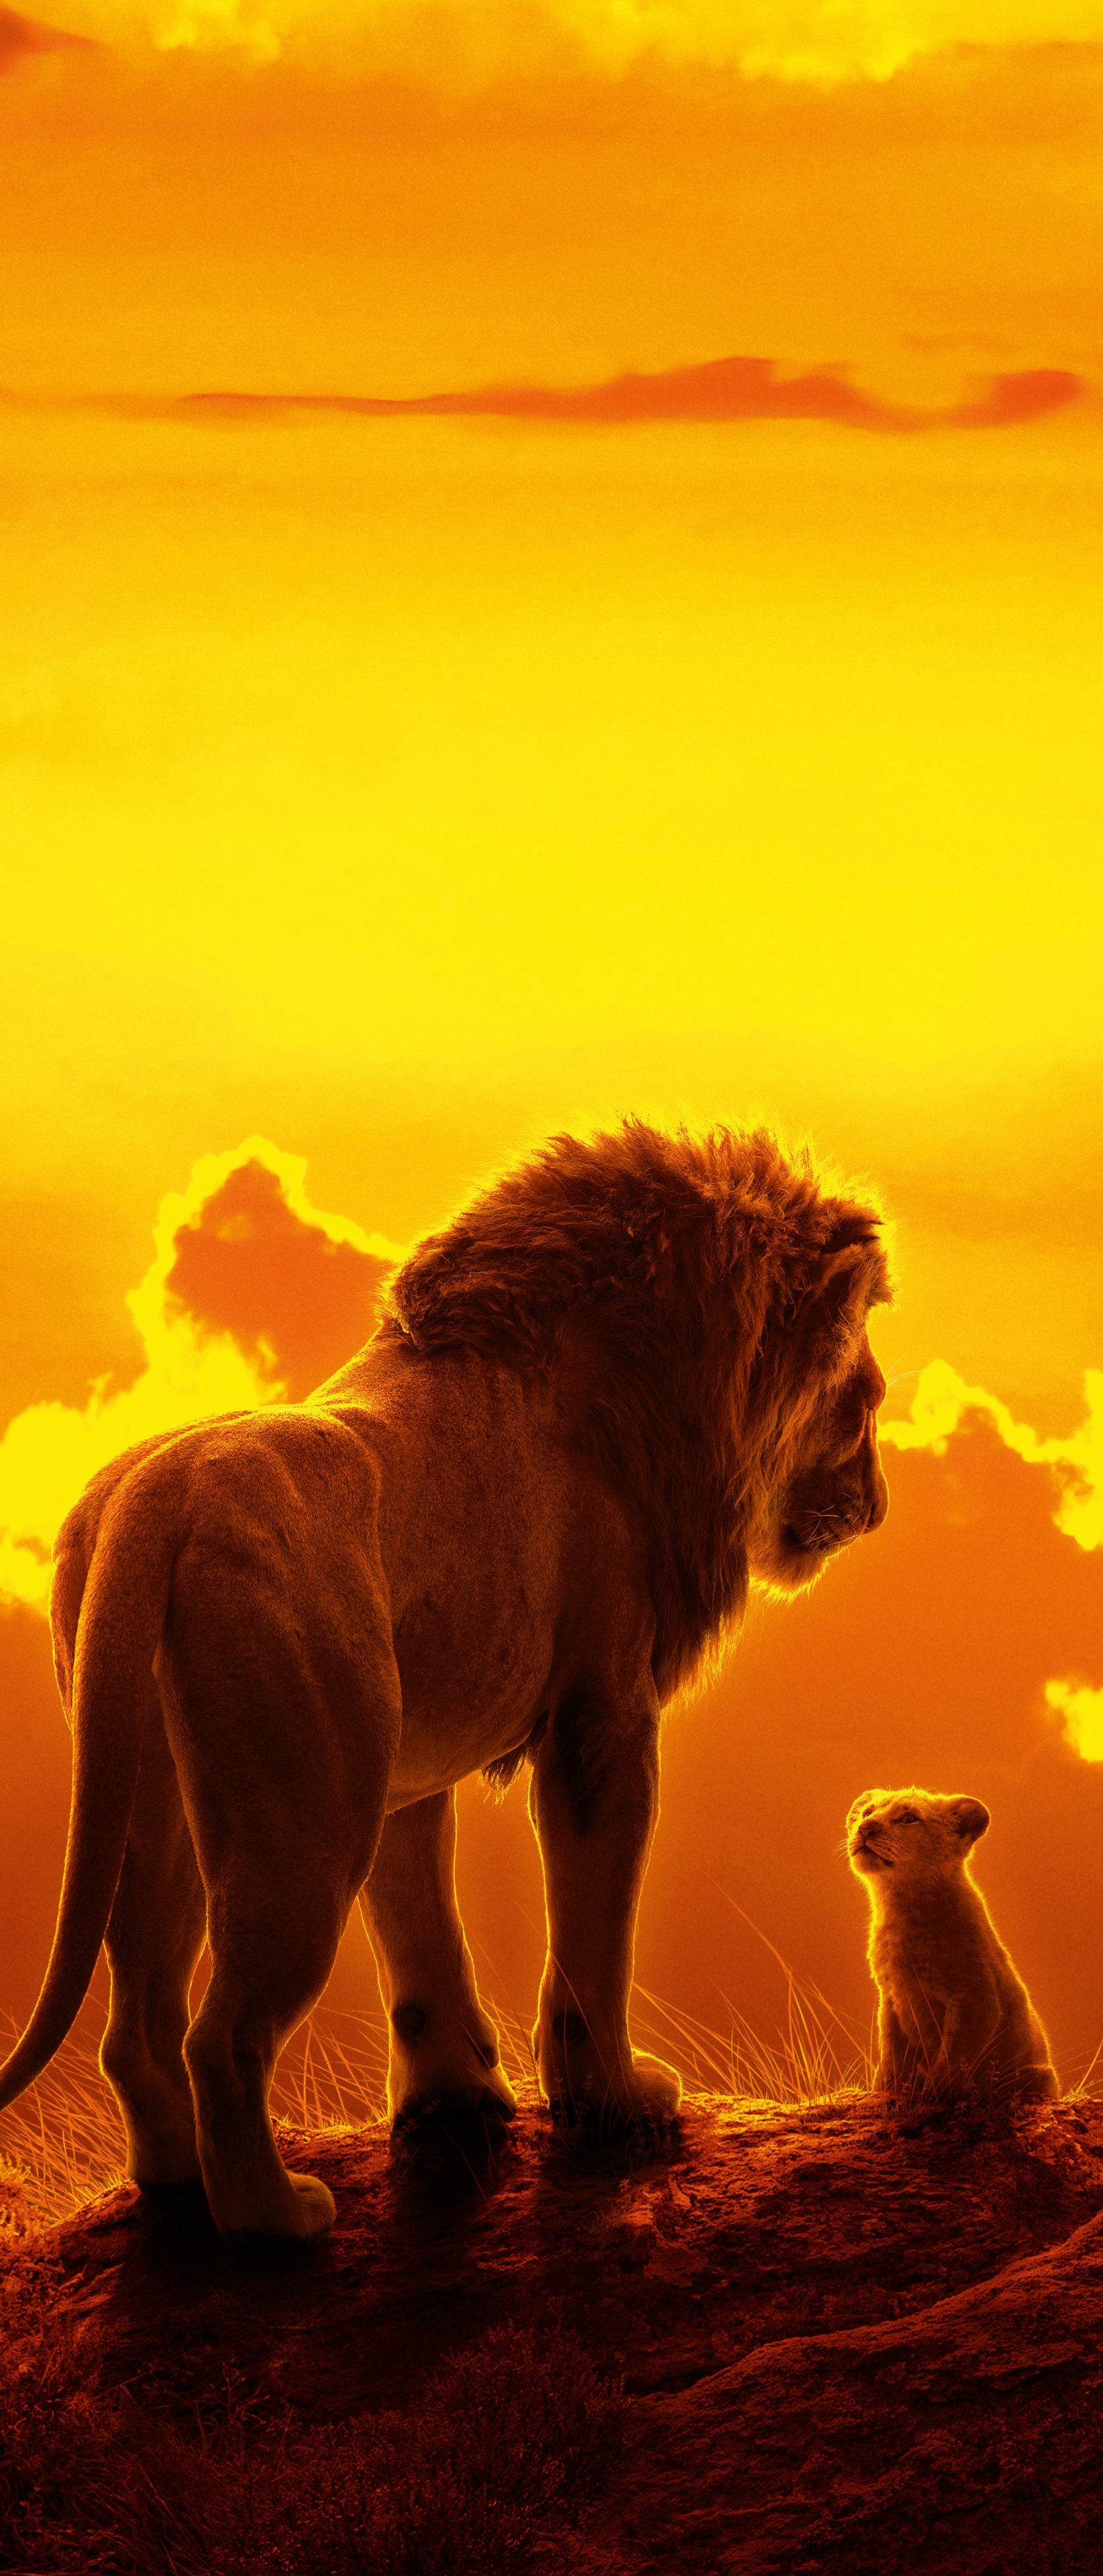 The Lion King (2019) Phone Wallpaper